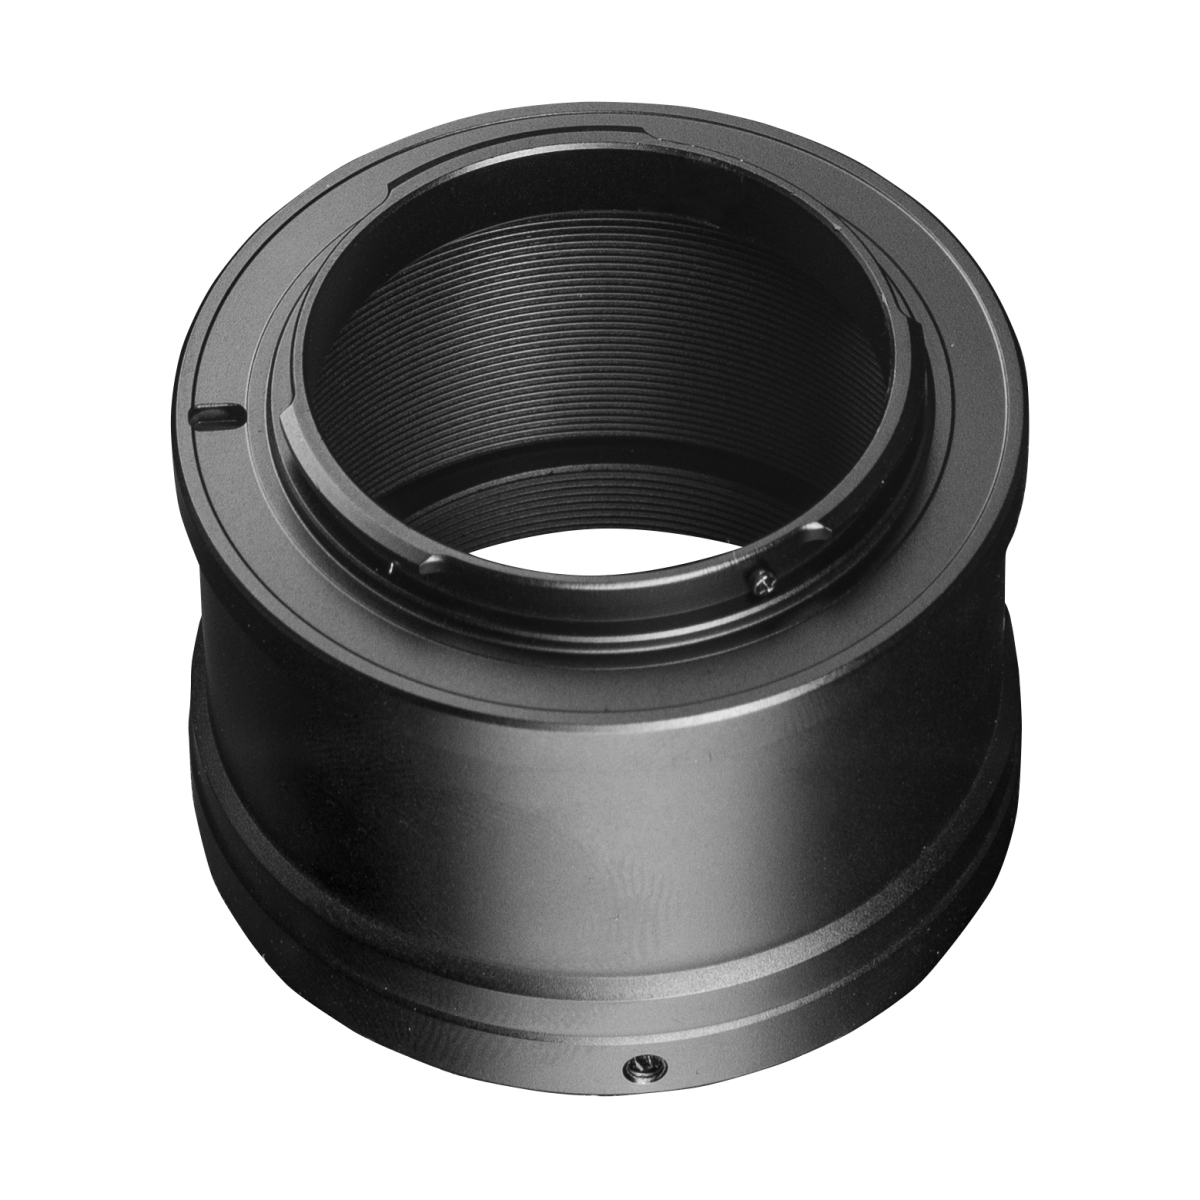 Walimex T2 Adapter for Micro-Four-Thirds